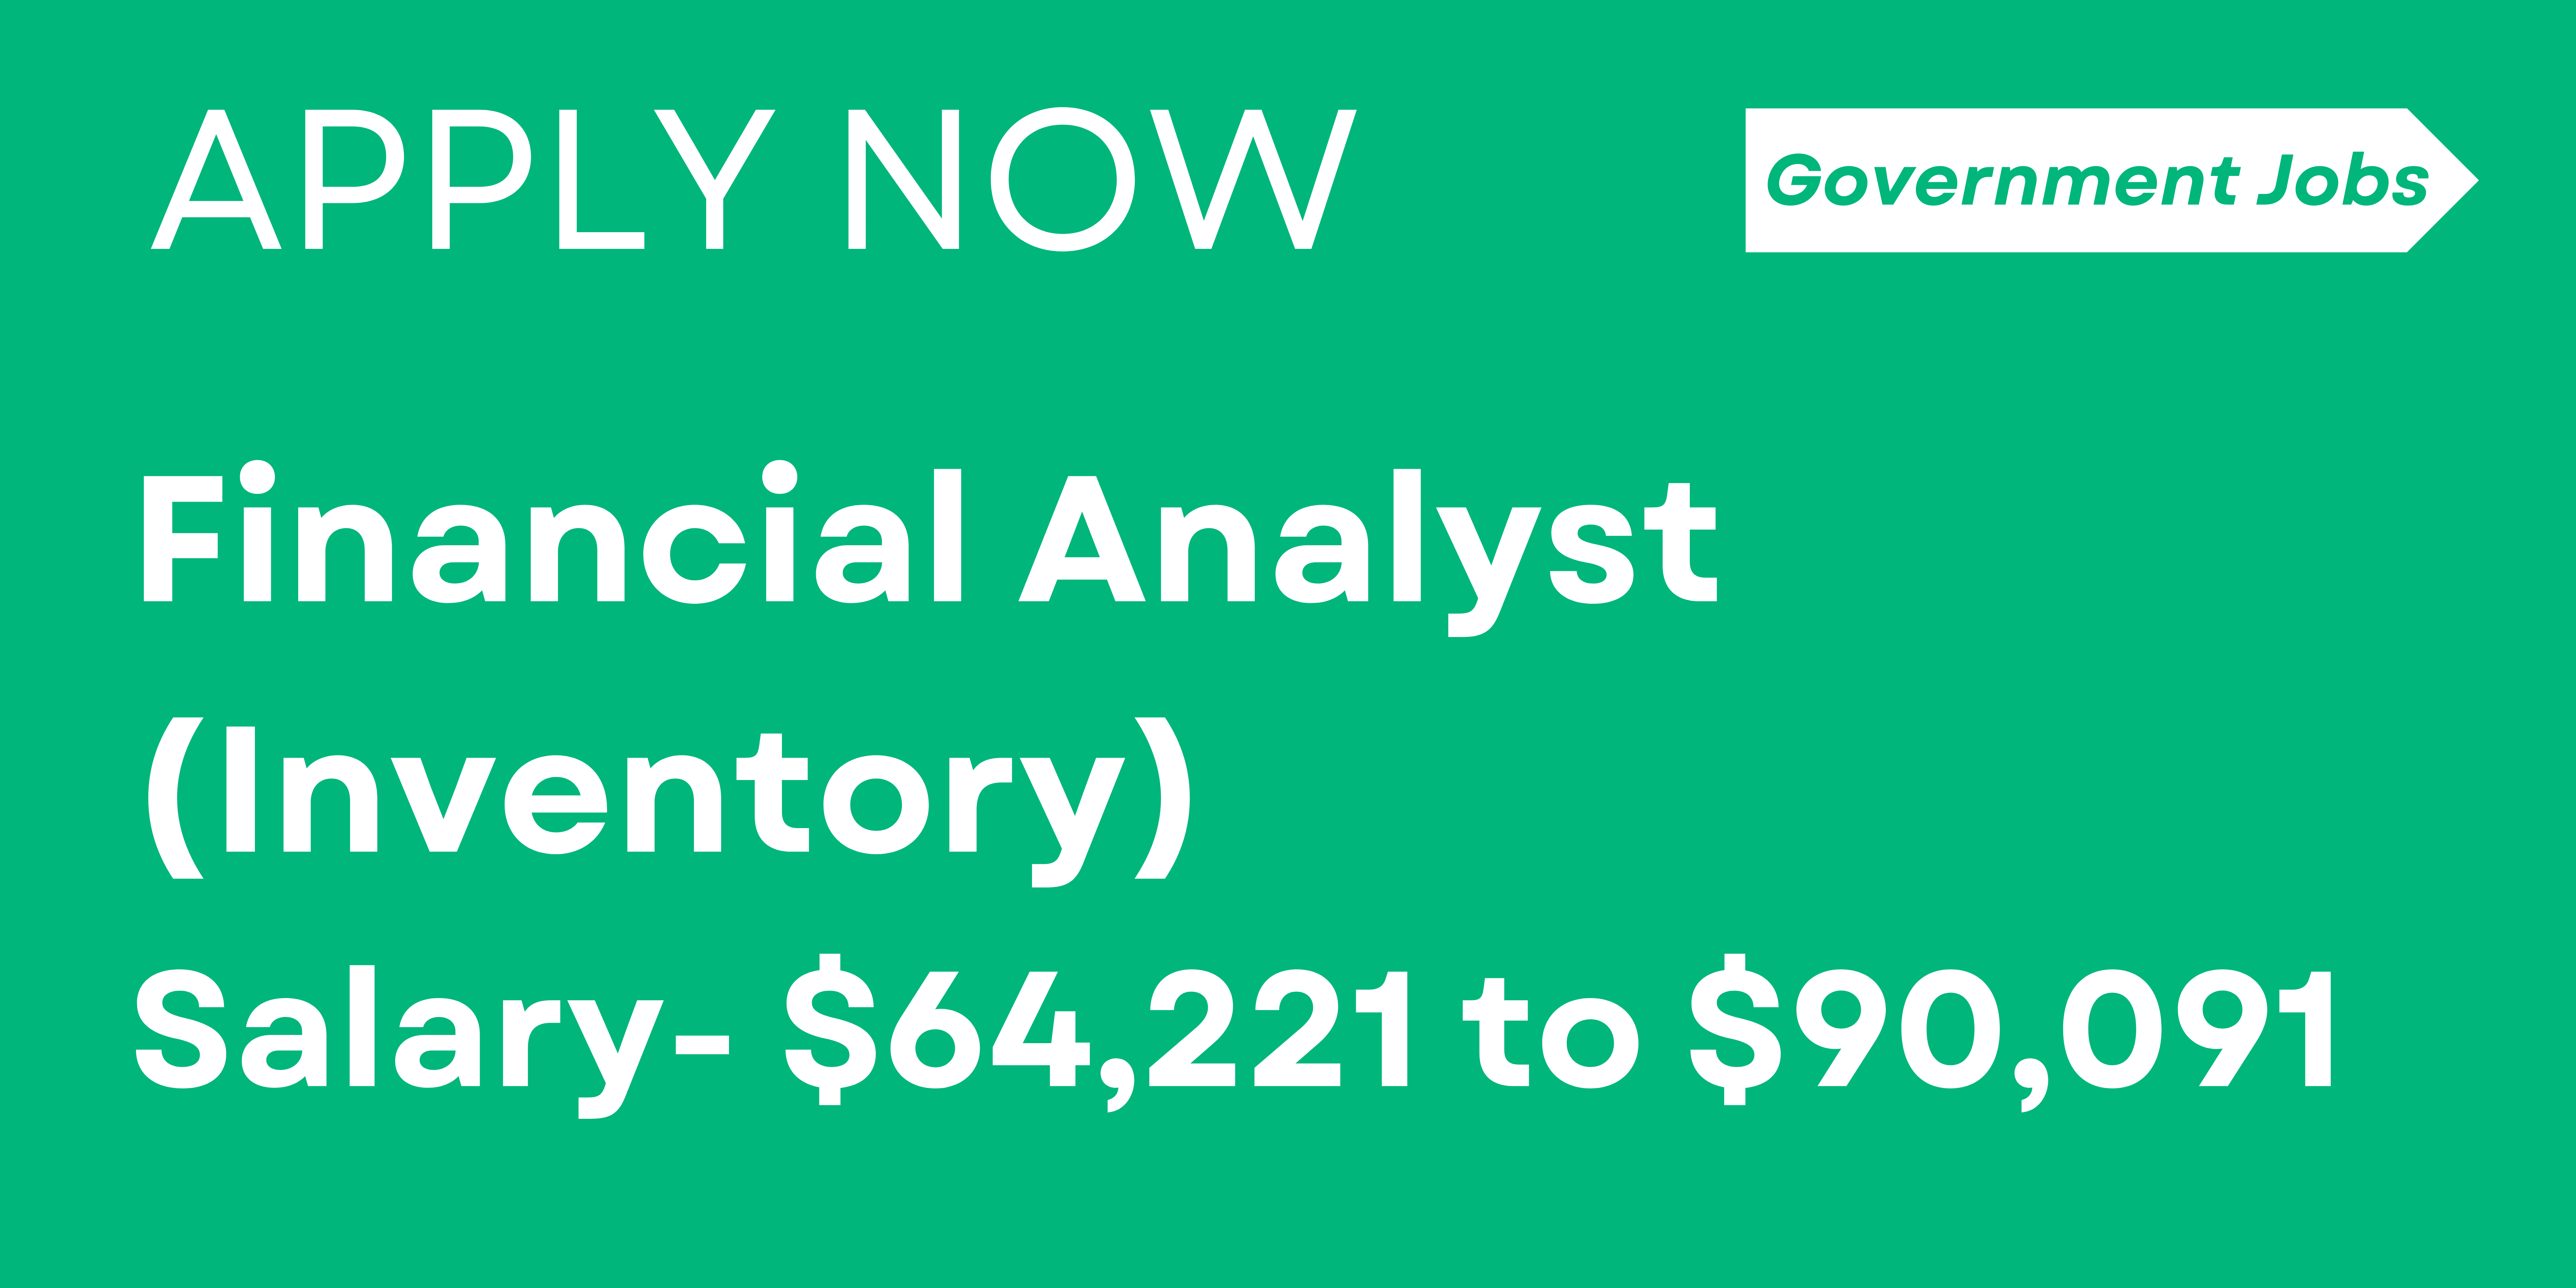 Financial Analyst (Inventory)